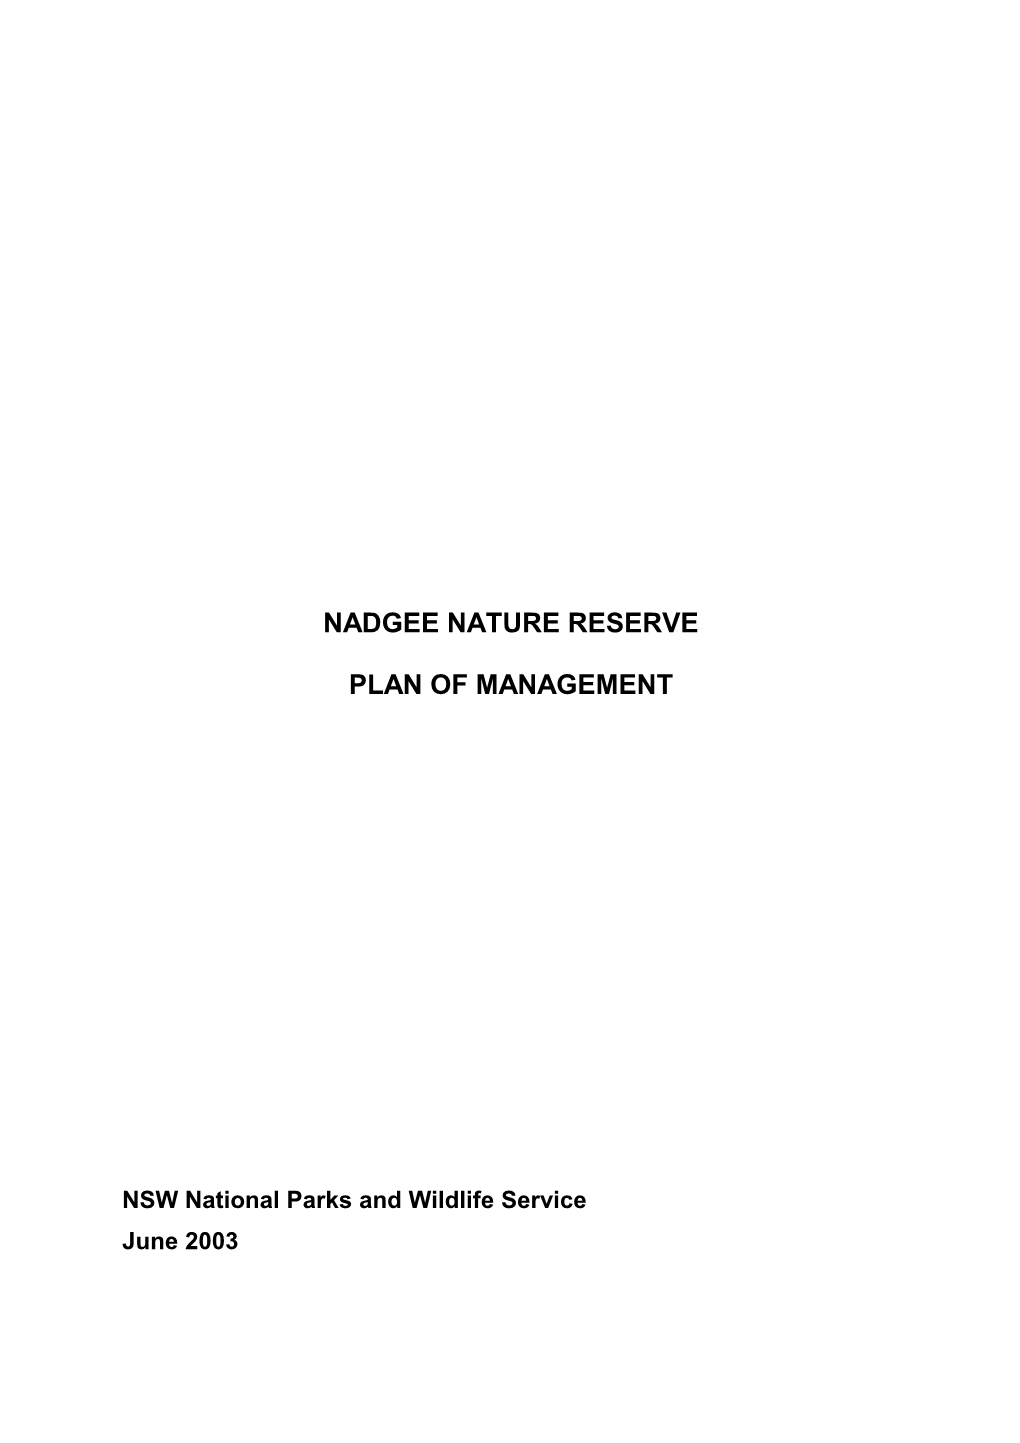 Nadgee Nature Reserve Plan of Management